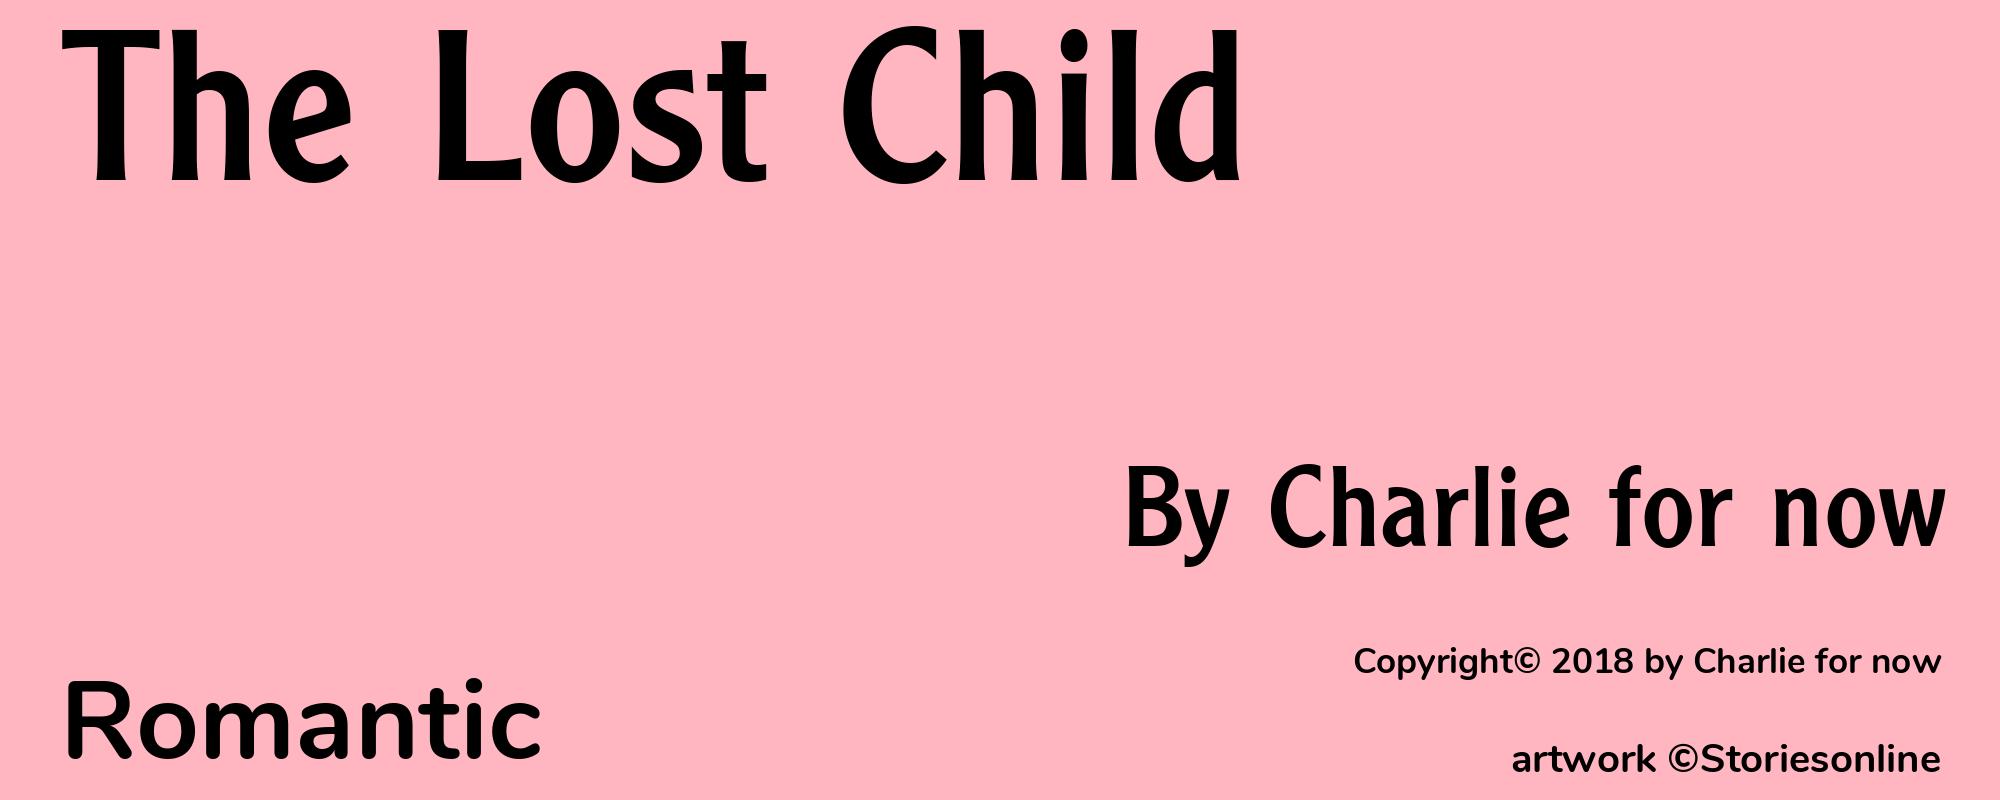 The Lost Child - Cover